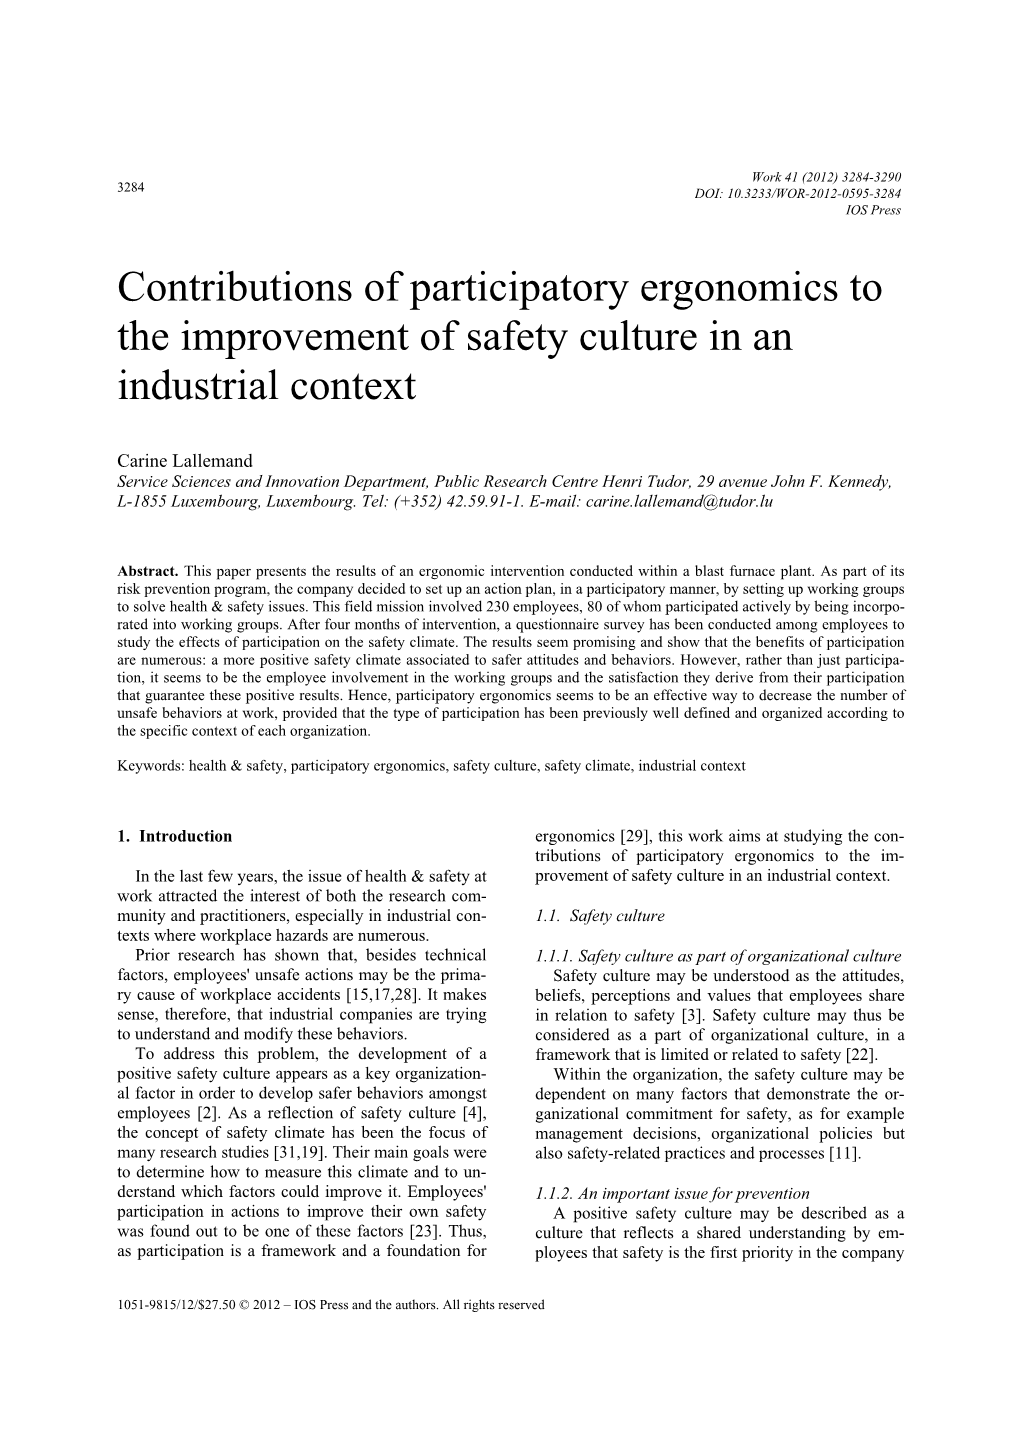 Contributions of Participatory Ergonomics to the Improvement of Safety Culture in an Industrial Context